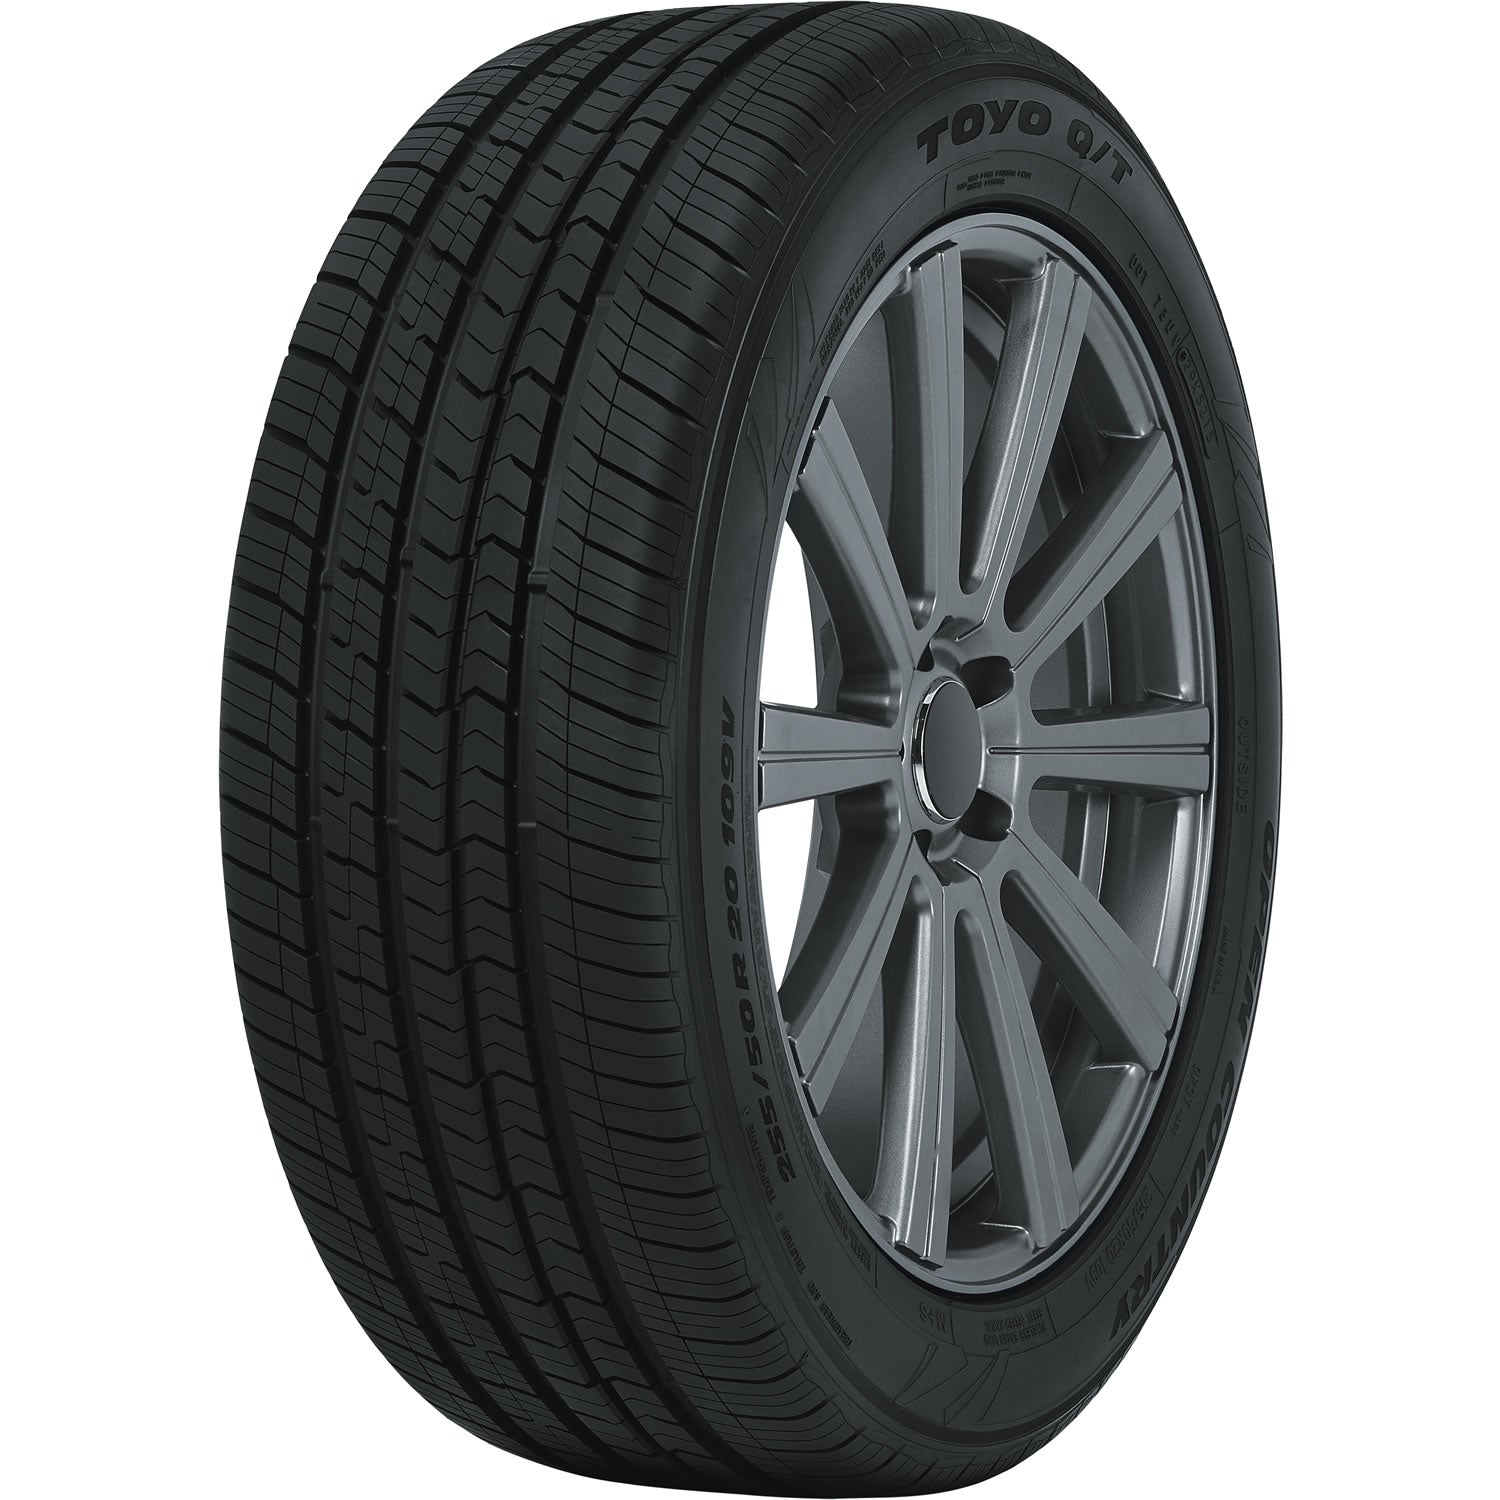 TOYO TIRES OPEN COUNTRY Q/T 235/65R17 (29.1X9.4R 17) Tires